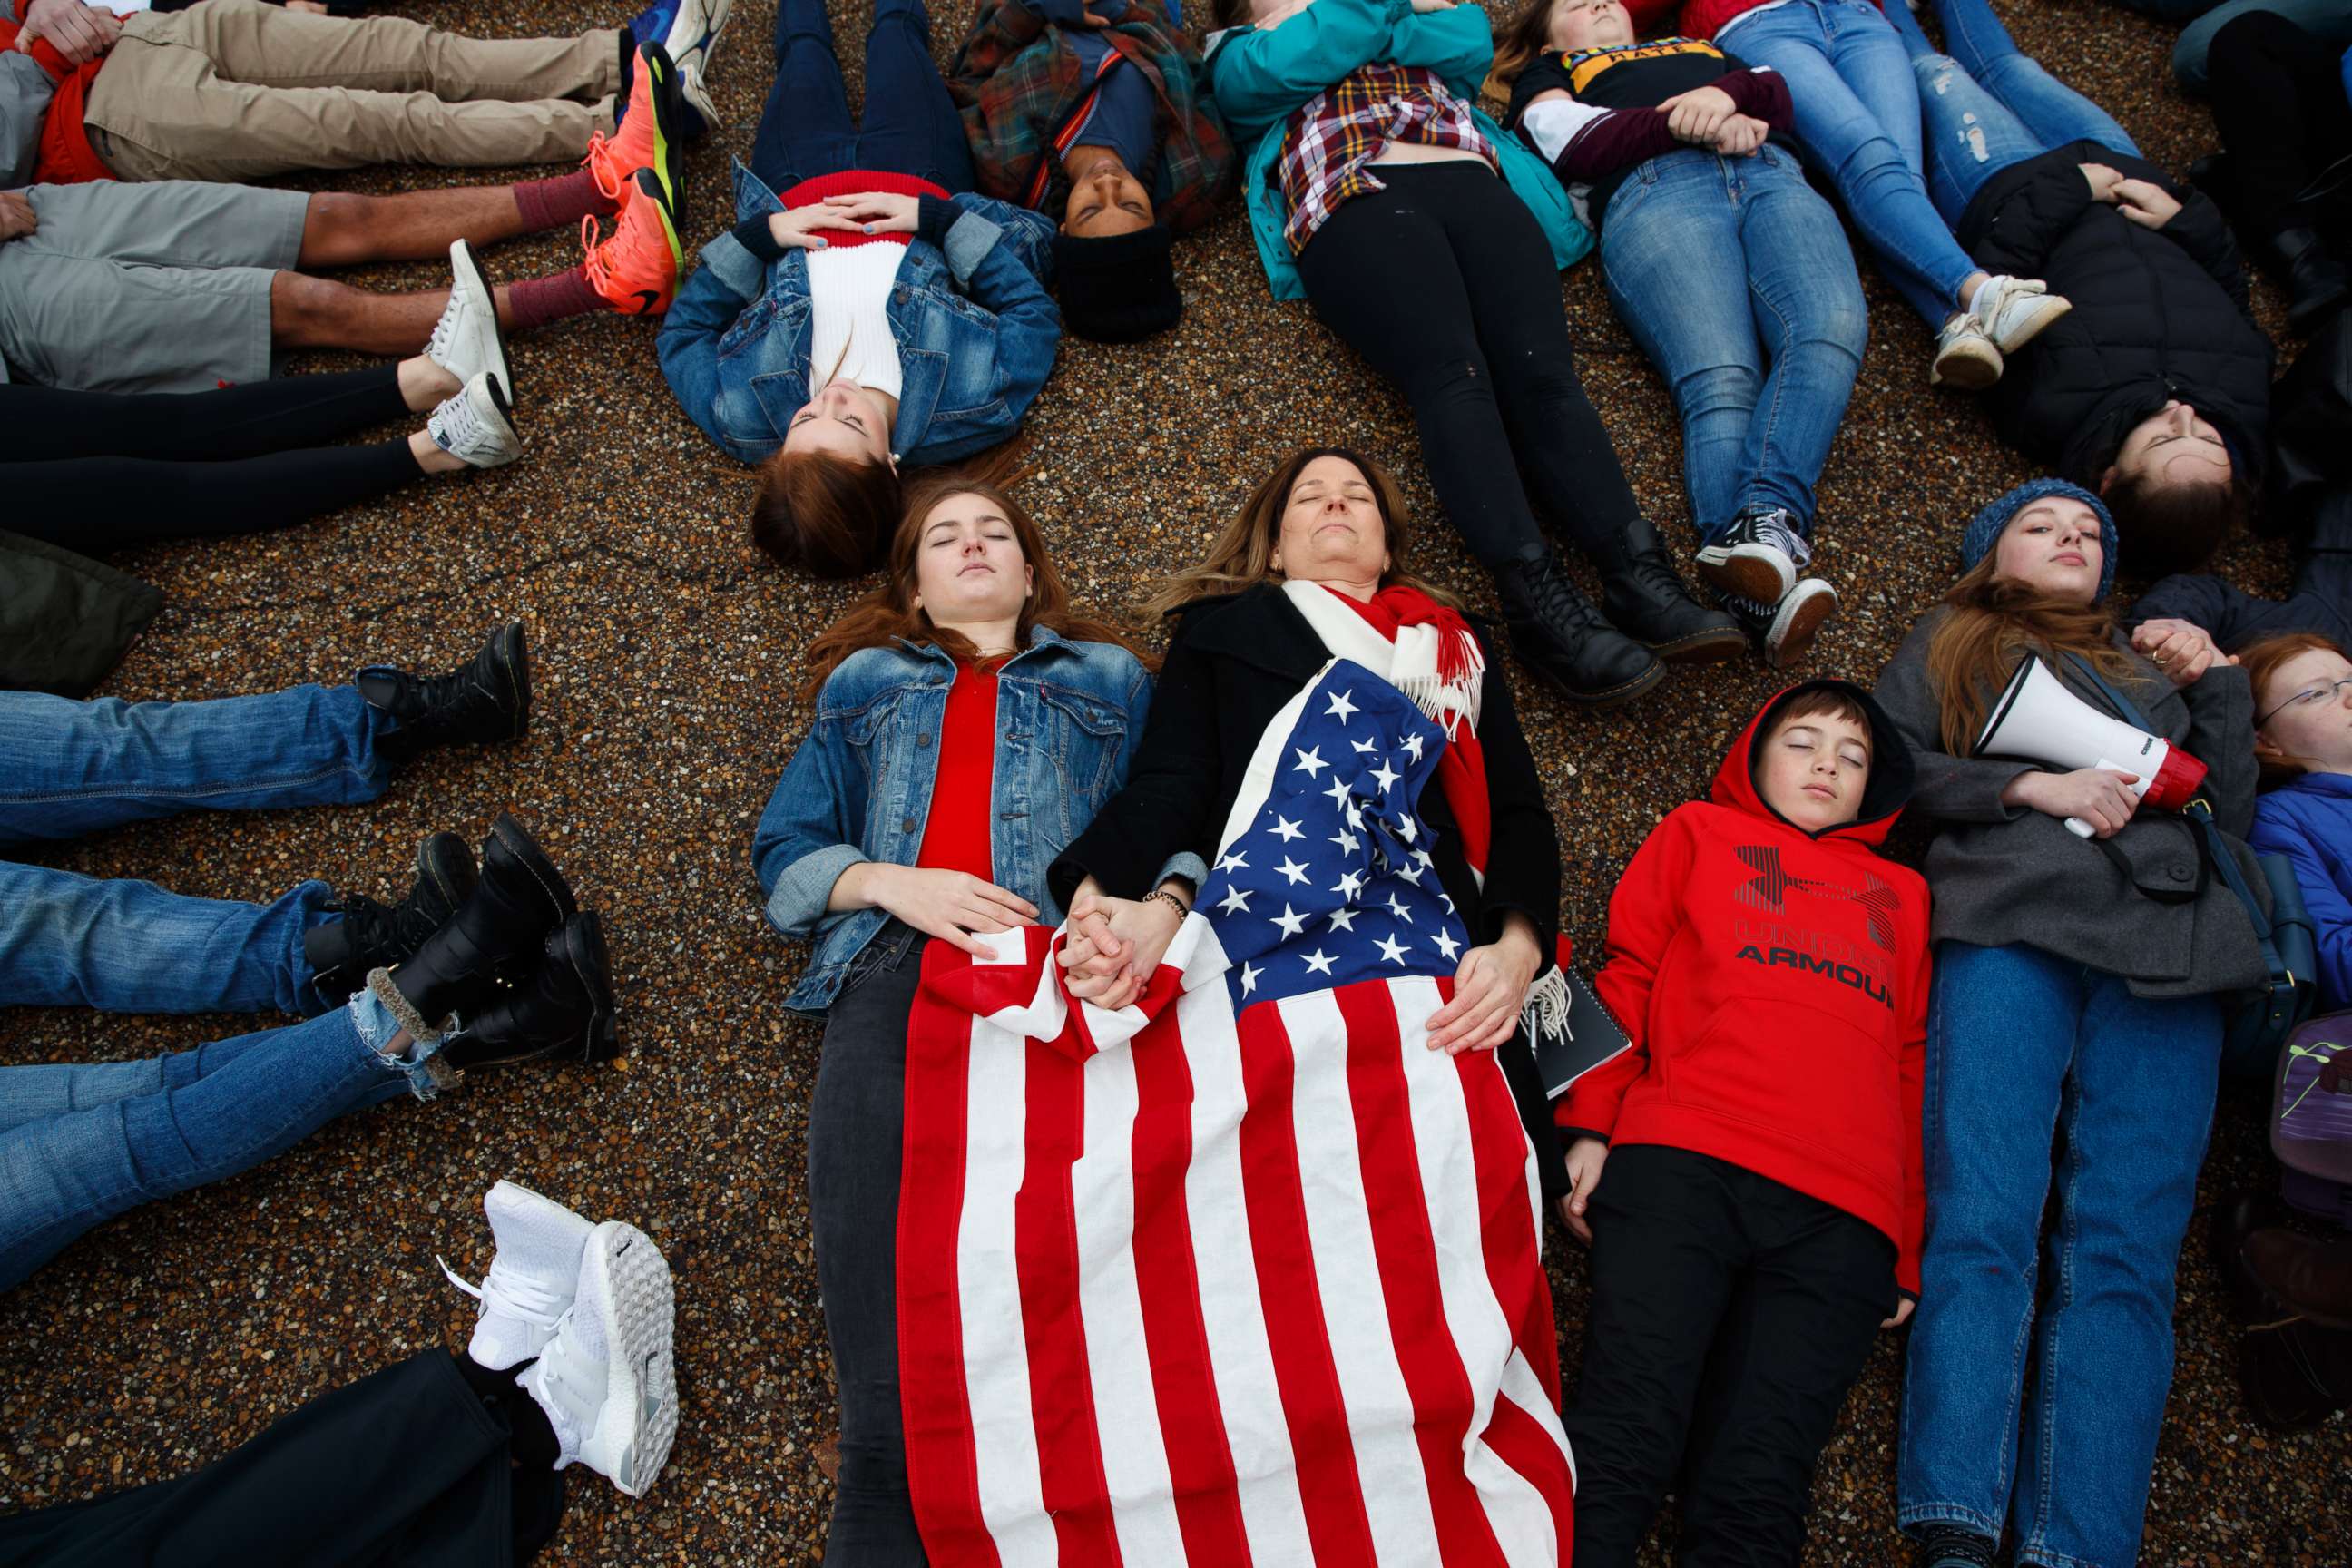 PHOTO: Abby Spangler and her daughter Eleanor Spangler Neuchterlein, 16, hold hands as they participate in a "lie-in" during a protest in favor of gun control reform in front of the White House, Feb. 19, 2018, in Washington.